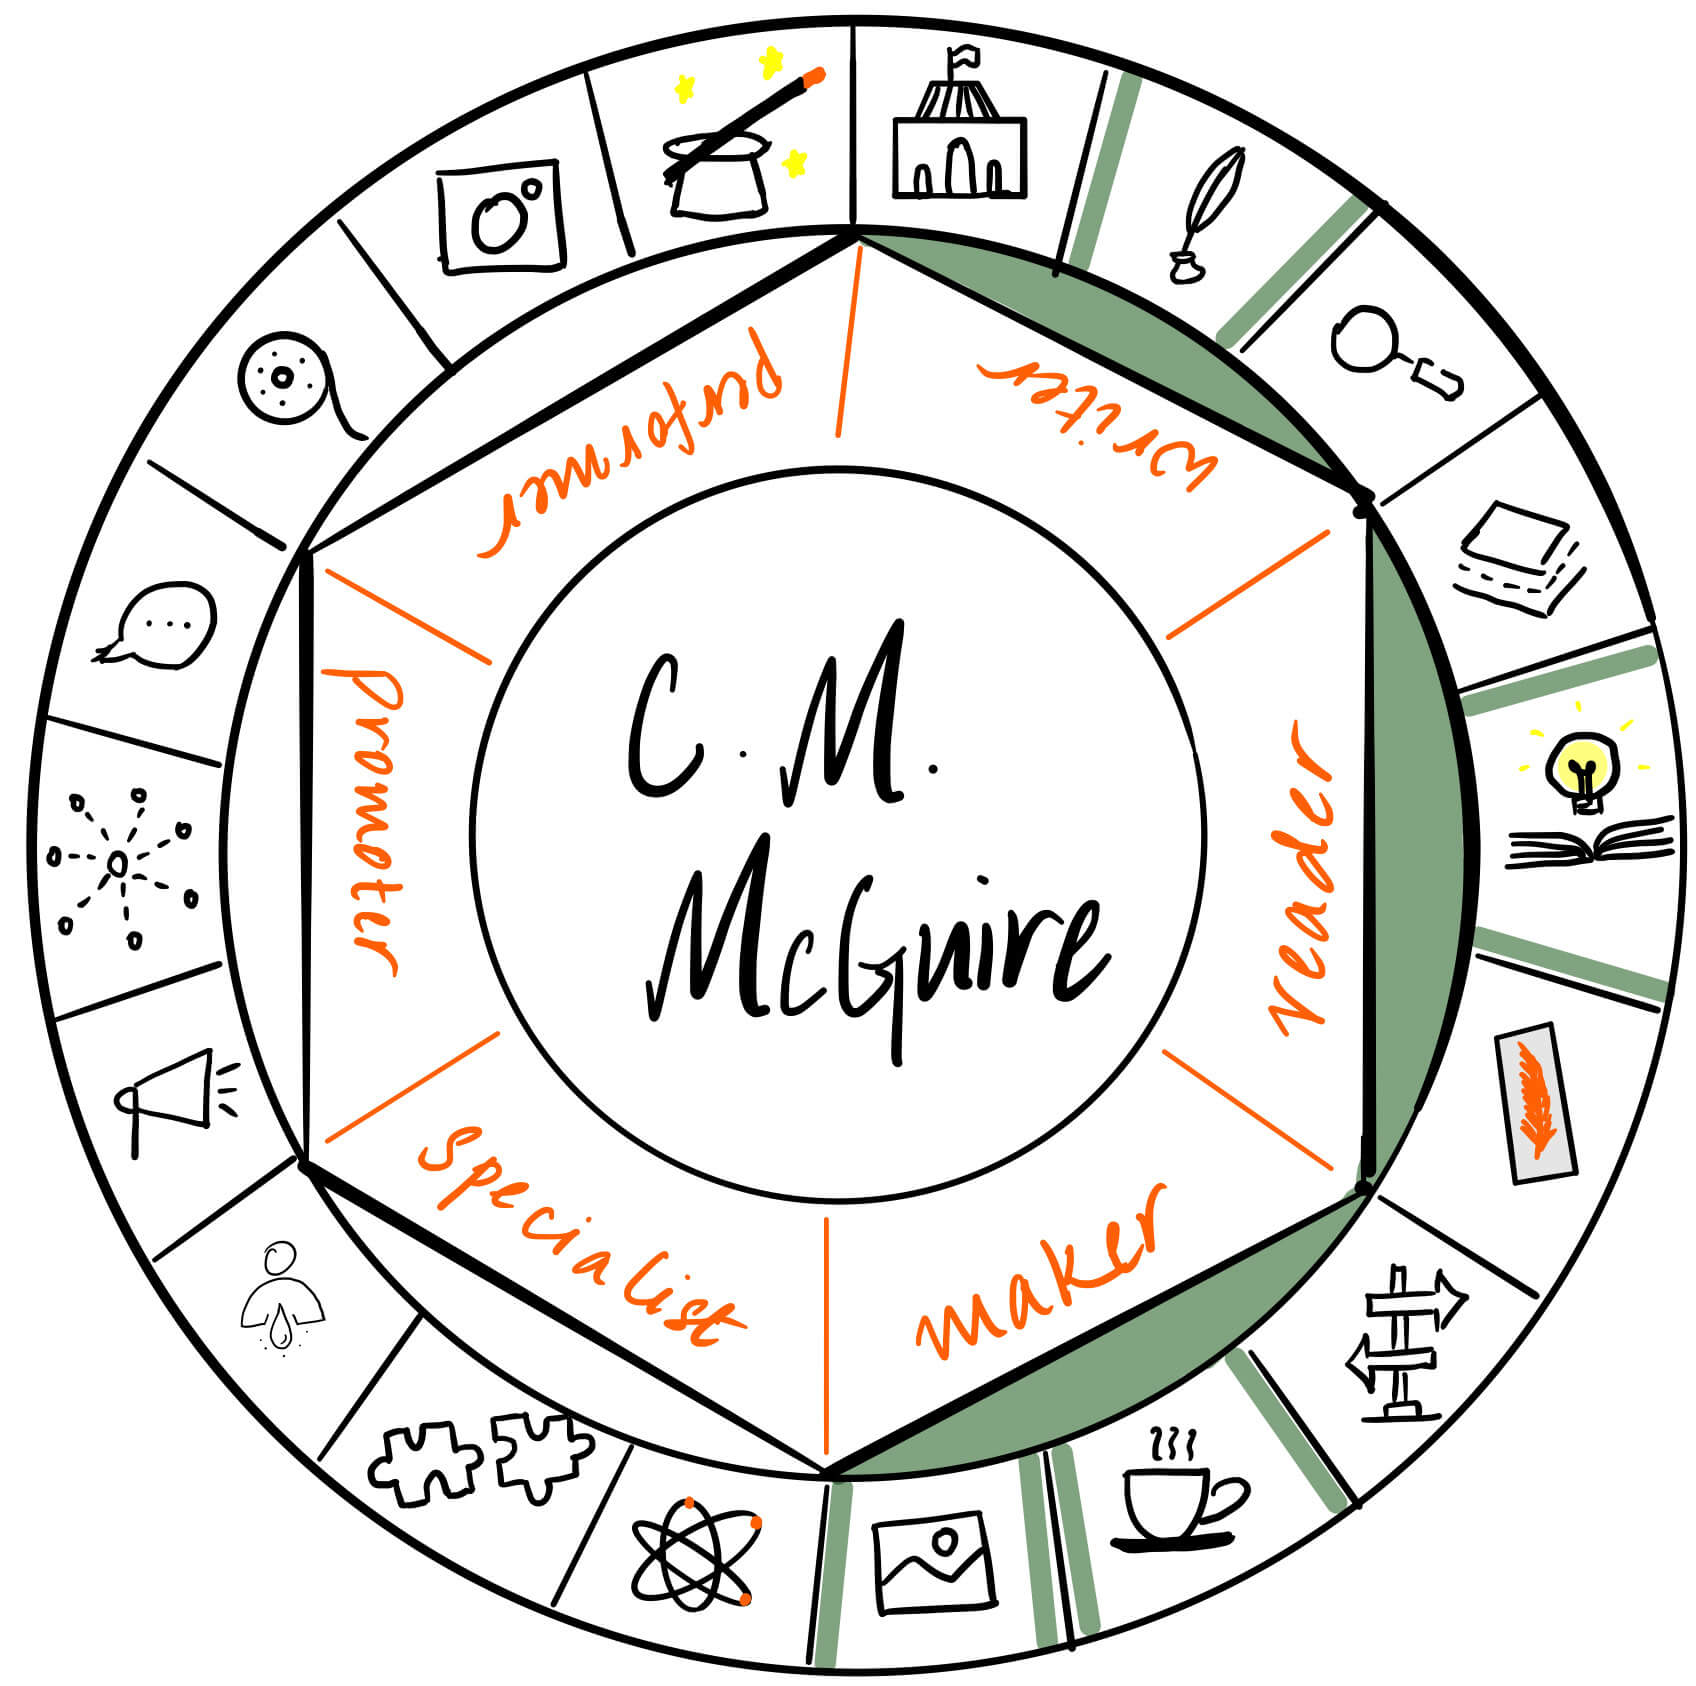 C. M. McGuire is a writer, reader and maker. It's a pleasure to have her over on The Creator's Roulette and dive into witches, witchcraft and magic.